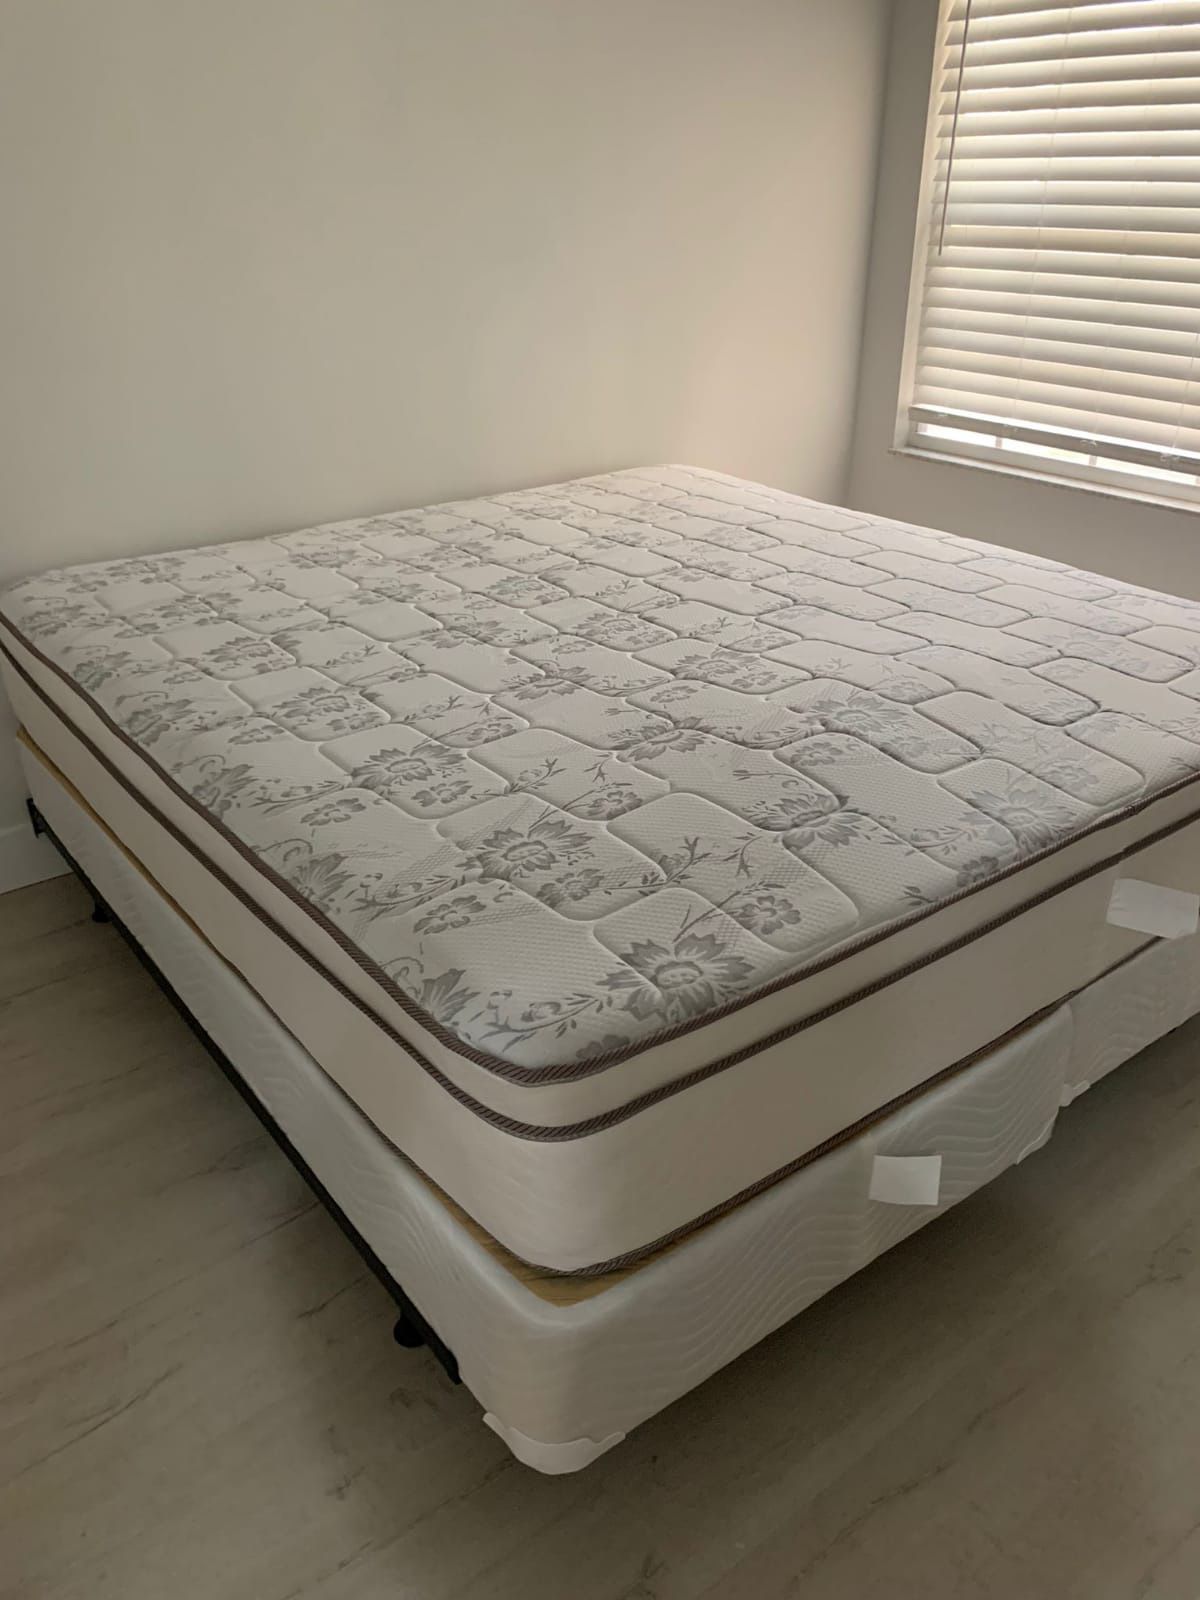 New King Nattress And Box Springs Bed Frame Is Not Included 